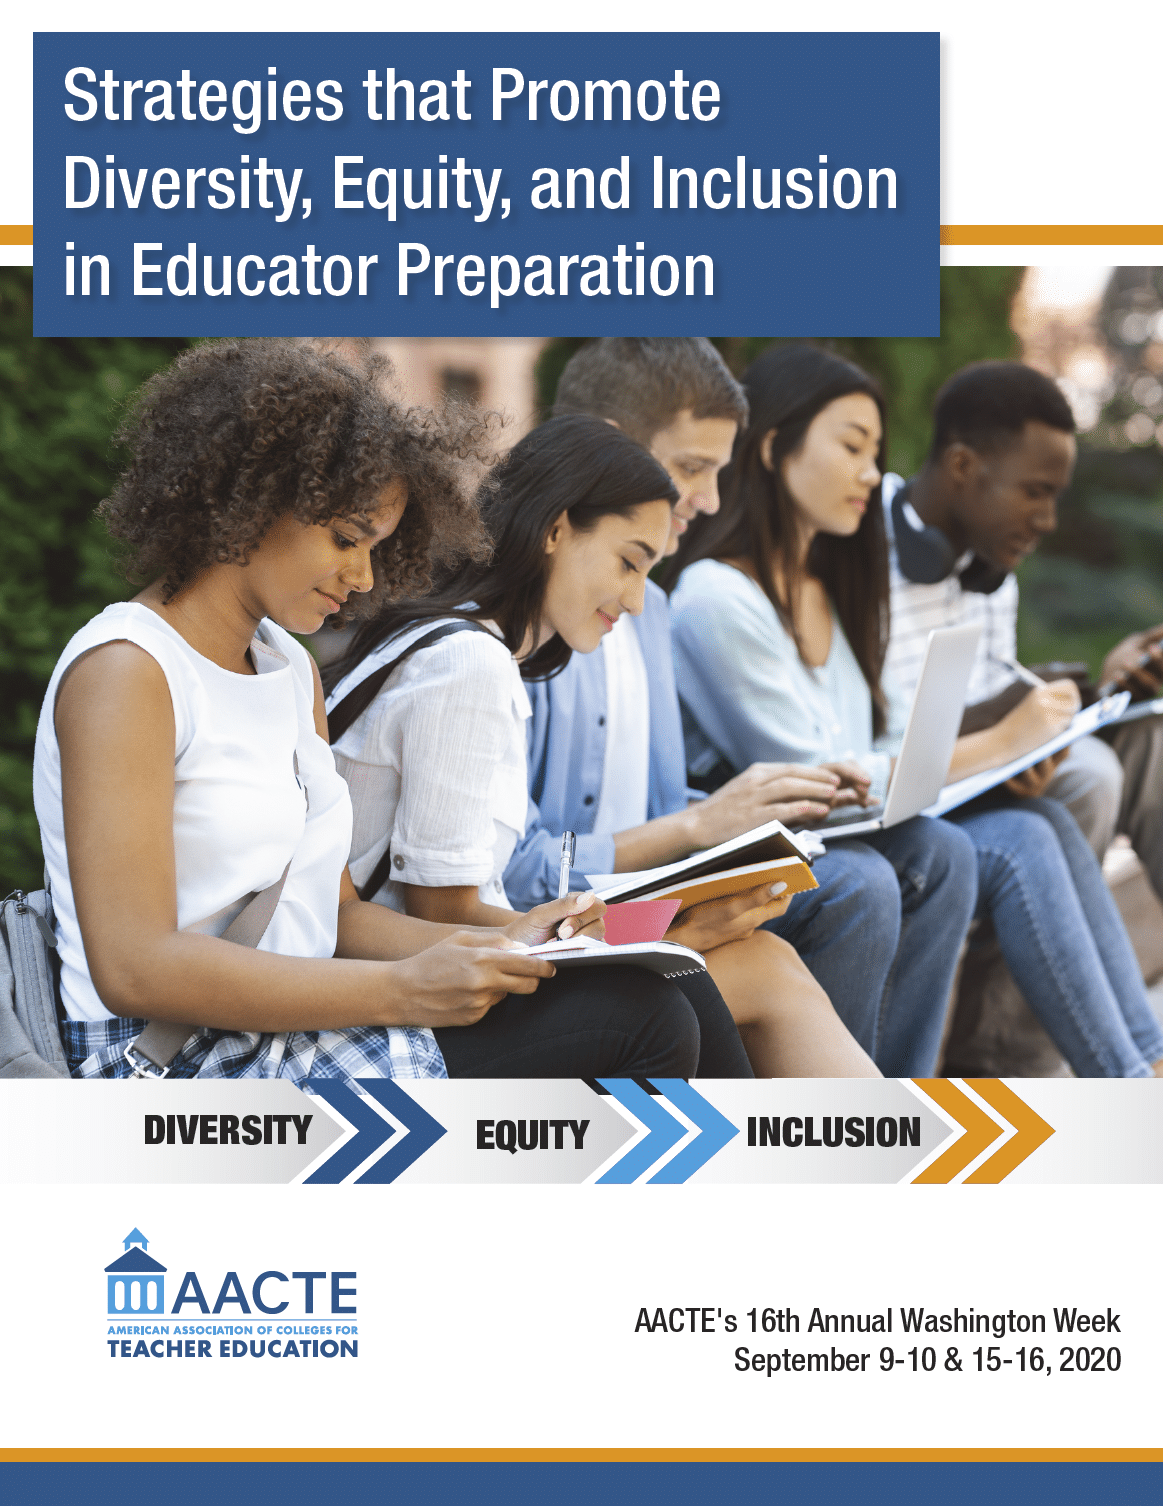 Strategies that Promote Diversity, Equity, and Inclusion in Educator Preparation